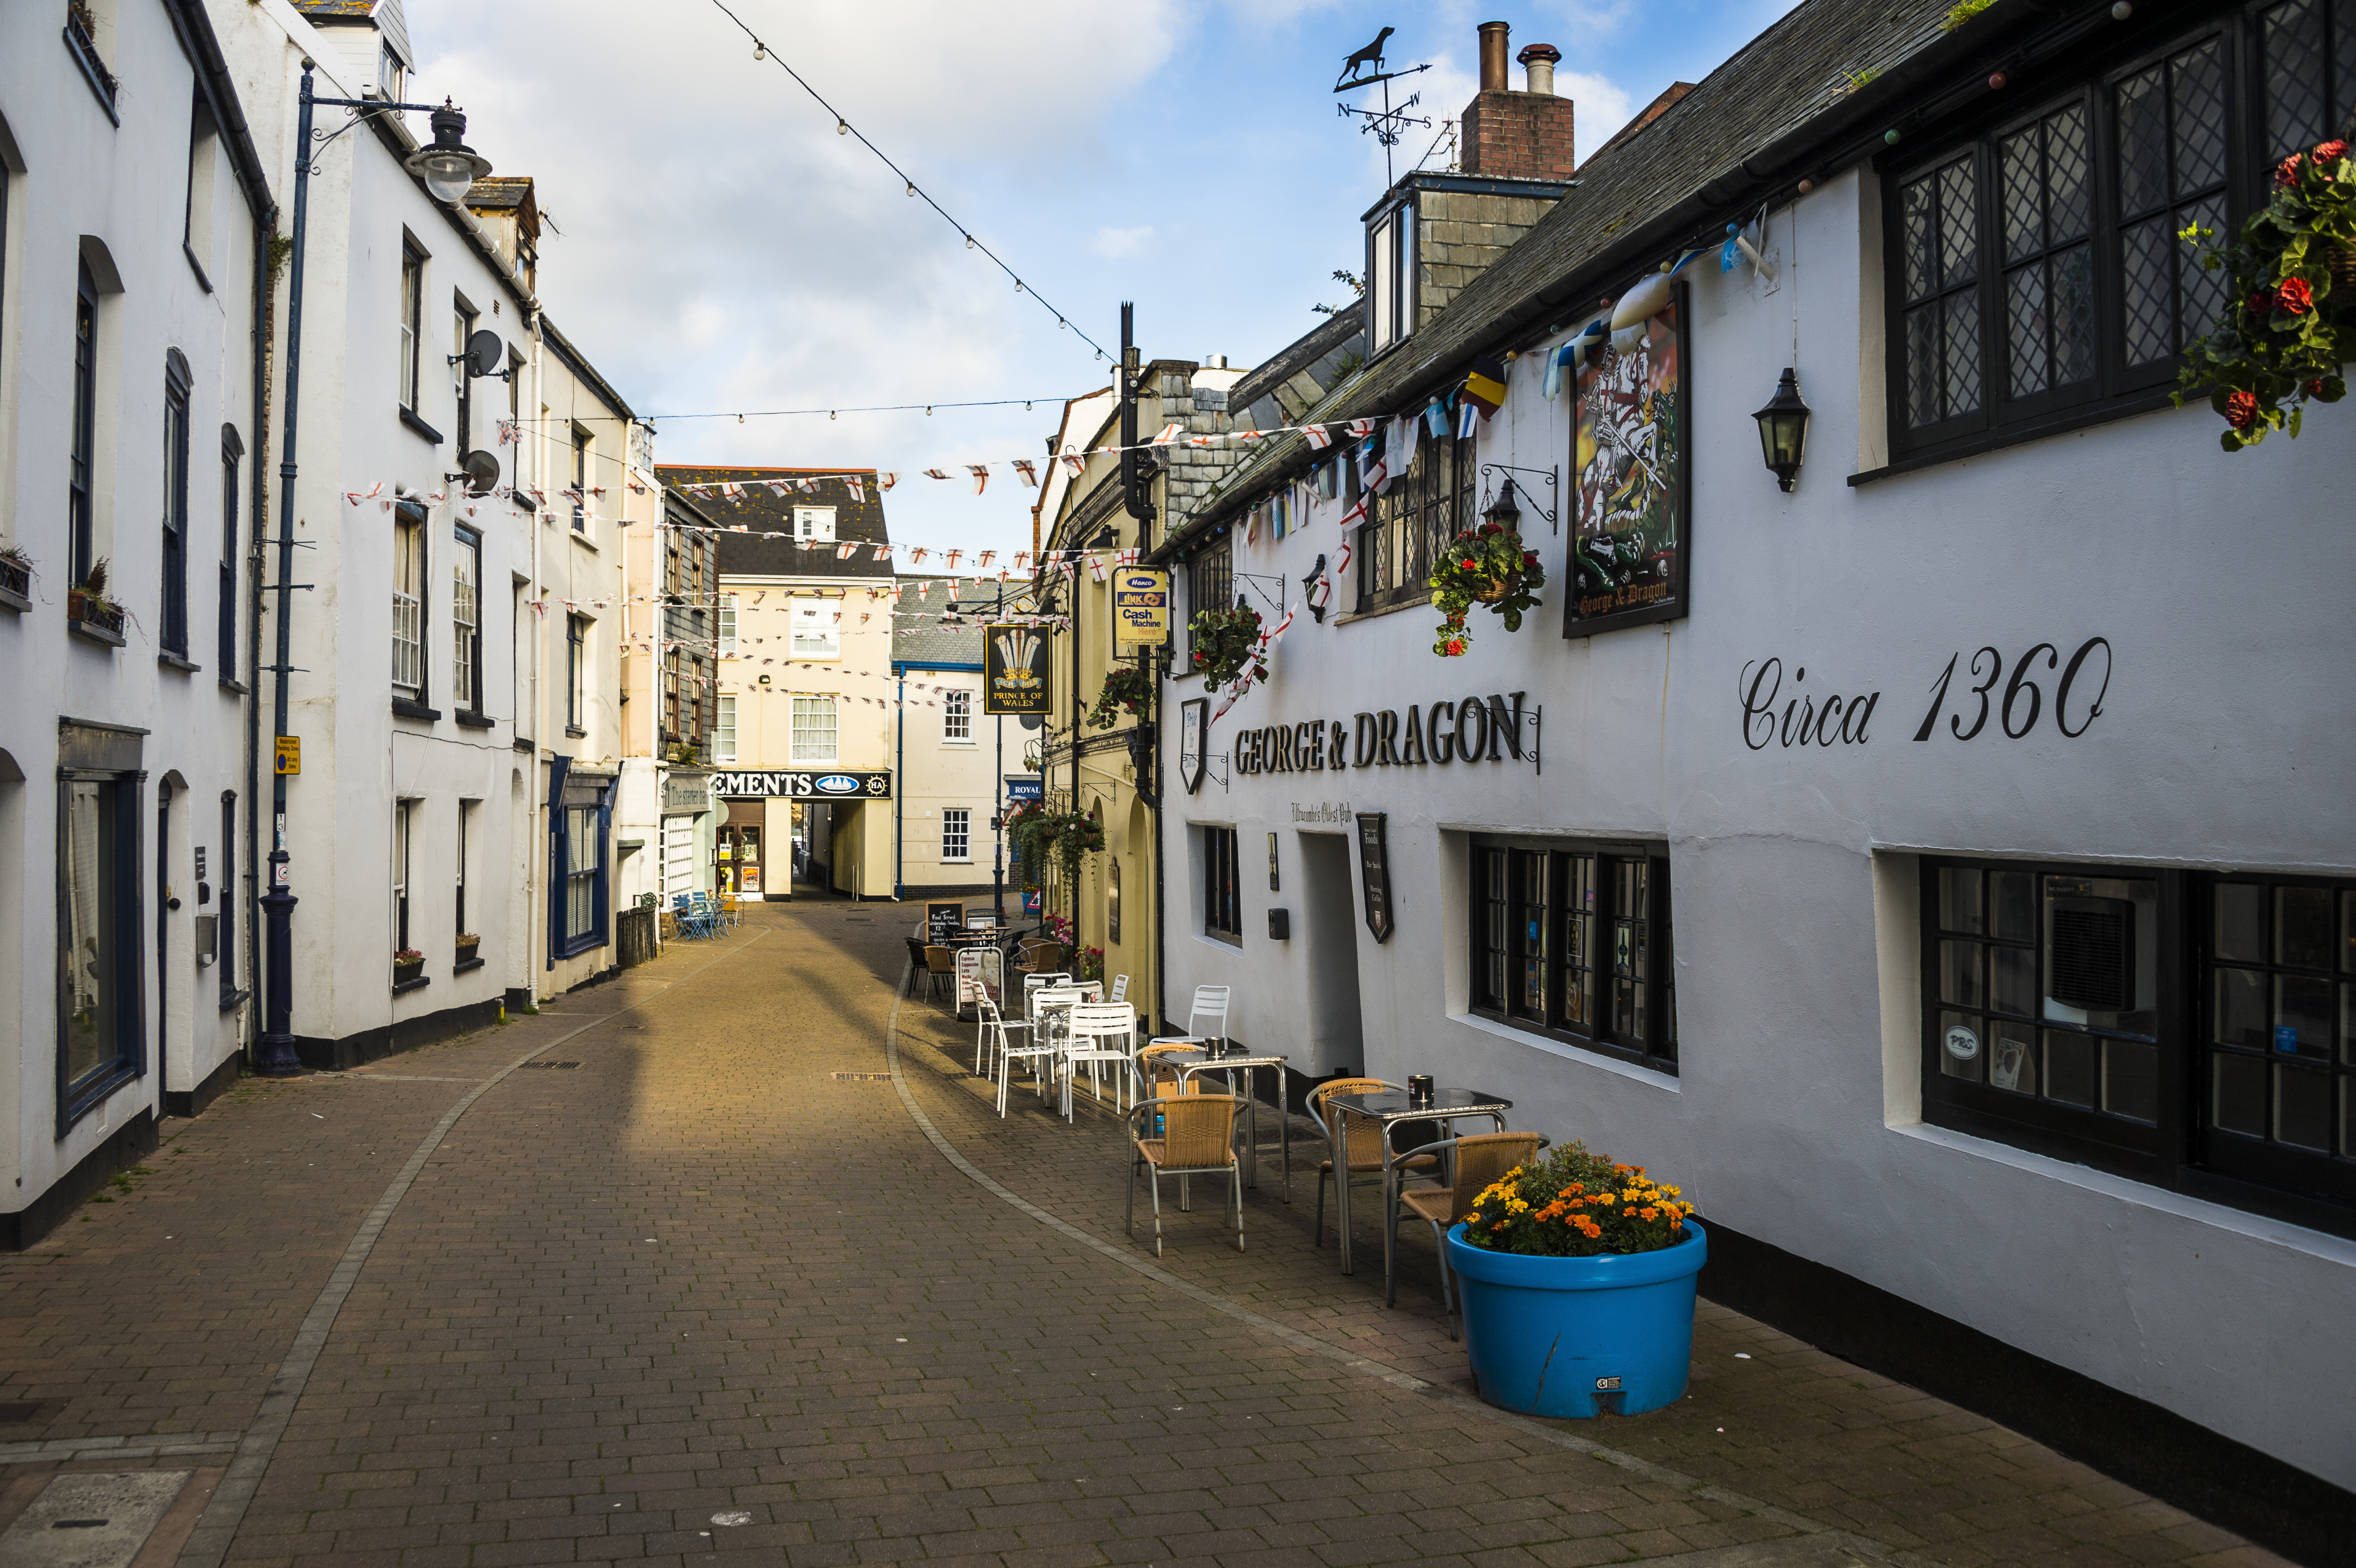 Picturesque harbour town of Ifracombe, North Devon, England, United Kingdom, Europe